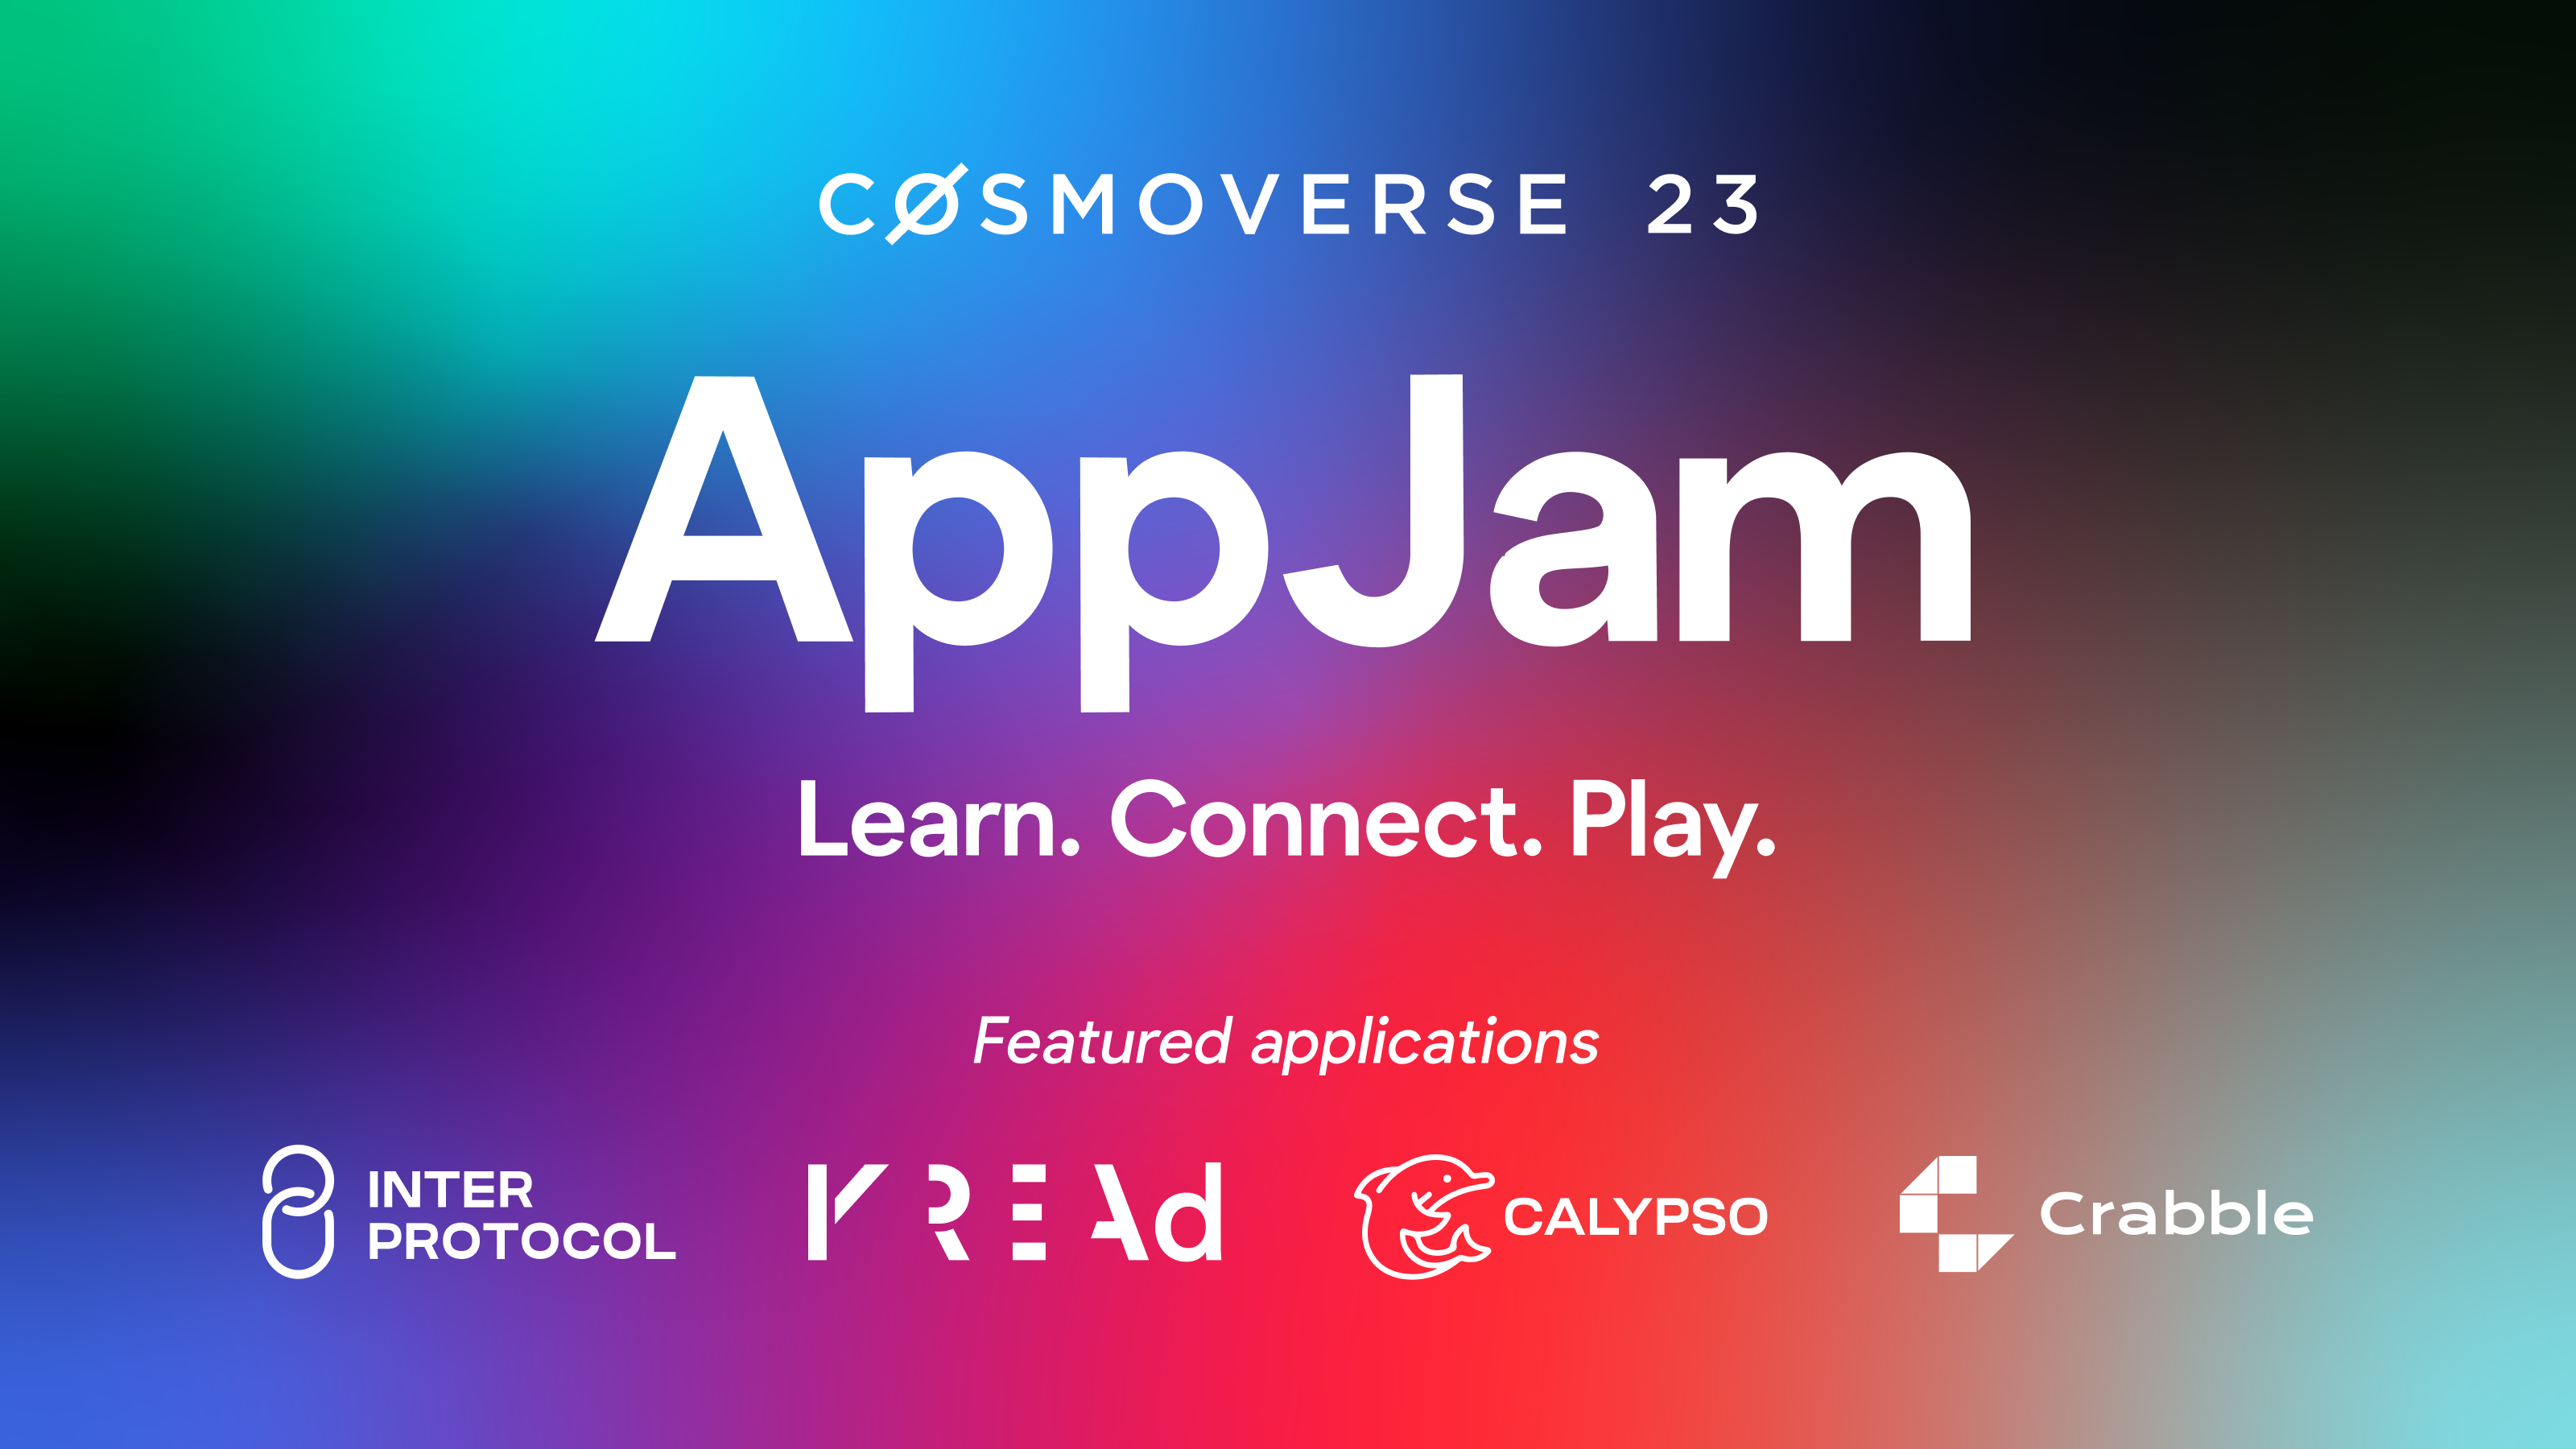 AppJam: An Immersive Agoric Experience at Cosmoverse 23